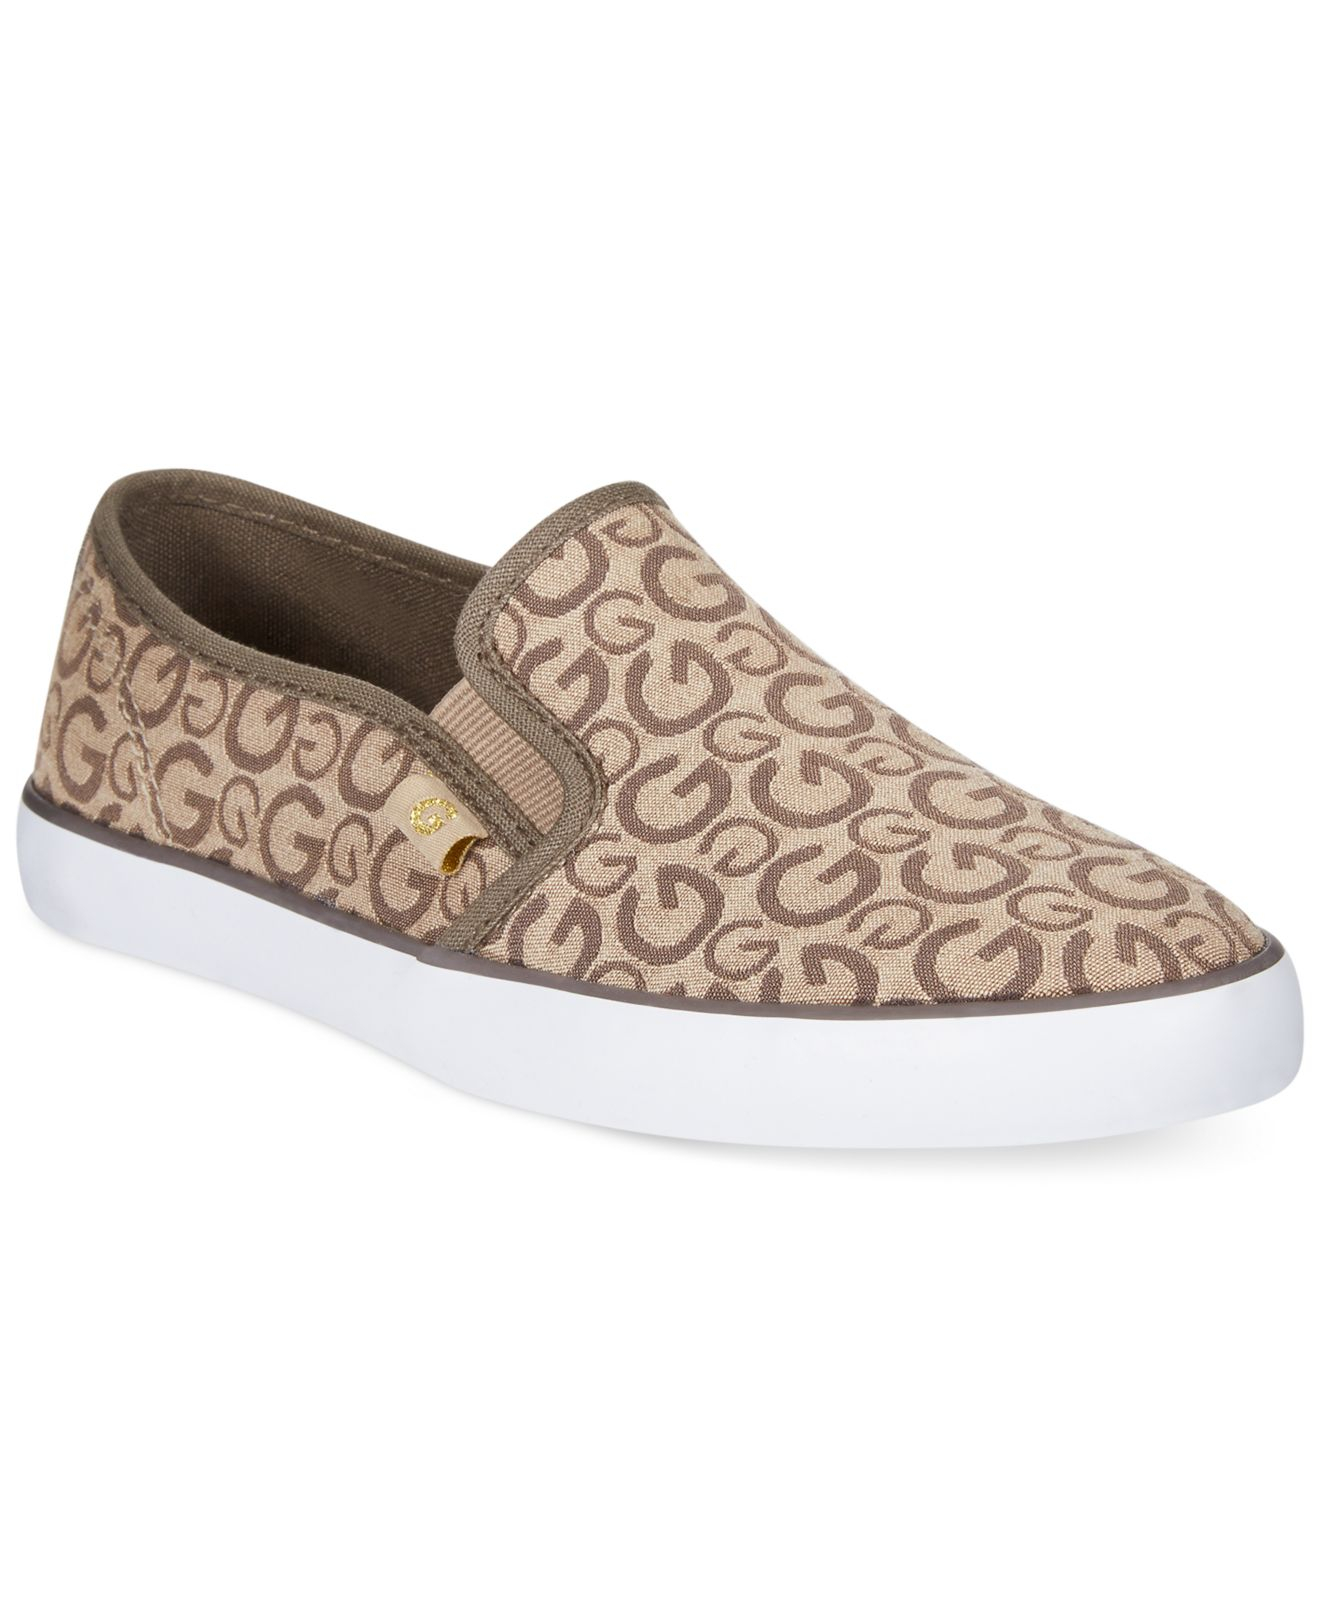 slip on guess shoes